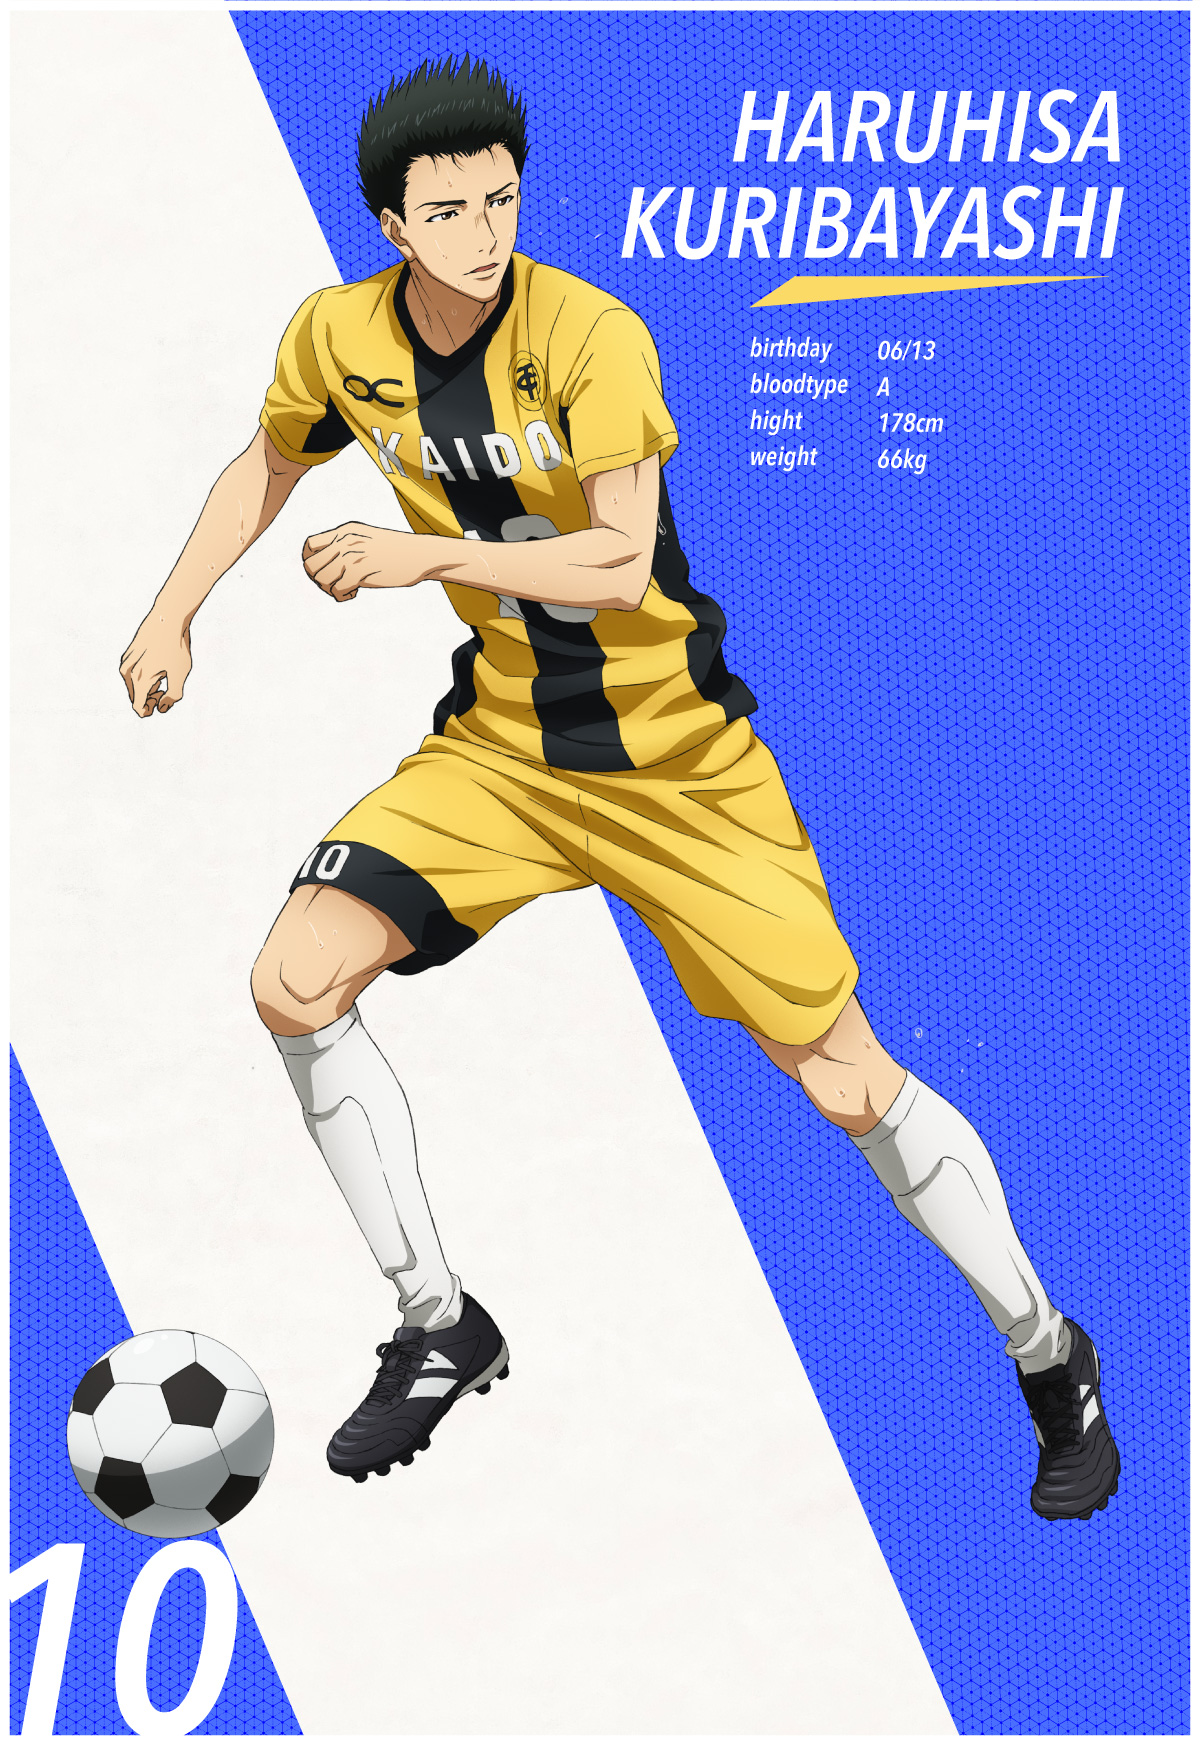 A "play visual" of Haruhisa Kuribayashi, a genius midfielder soccer player, in his uniform fielding a soccer ball from the TV anime Aoashi.